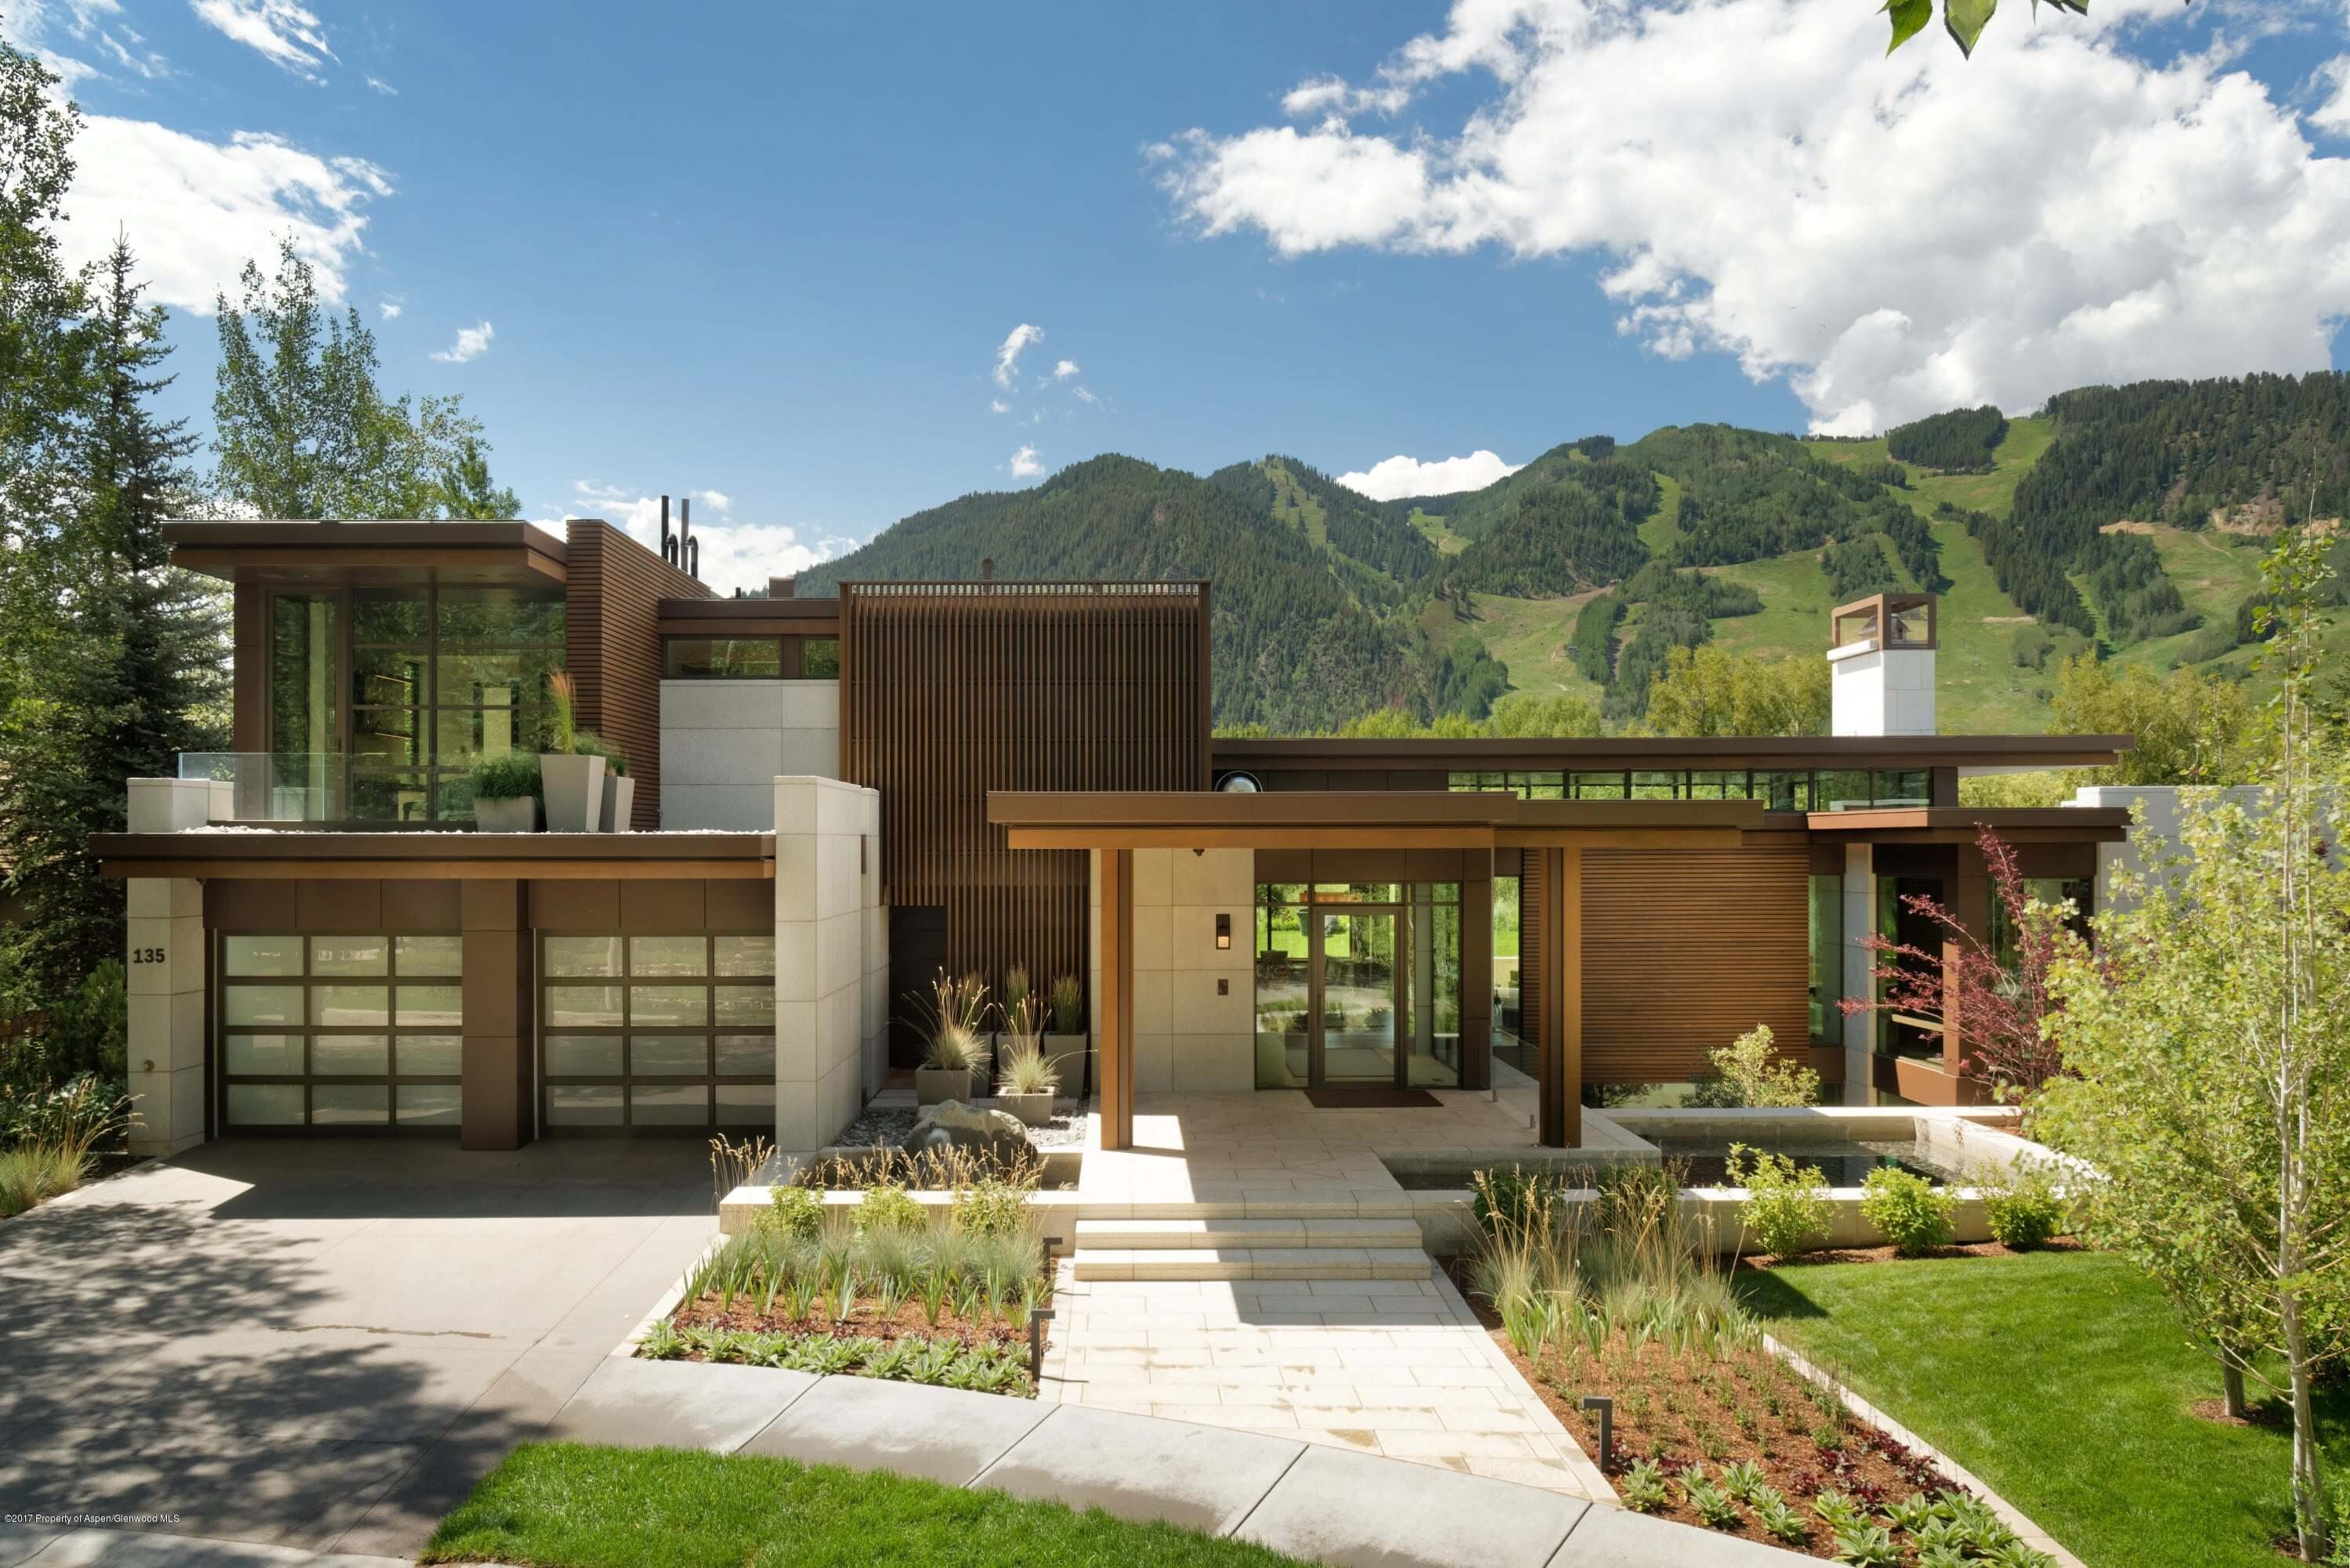 New Contemporary Aspen CO Home for Sale at 135 Miners Trail Closes at $21.5M/$2,621 Sq Ft Image